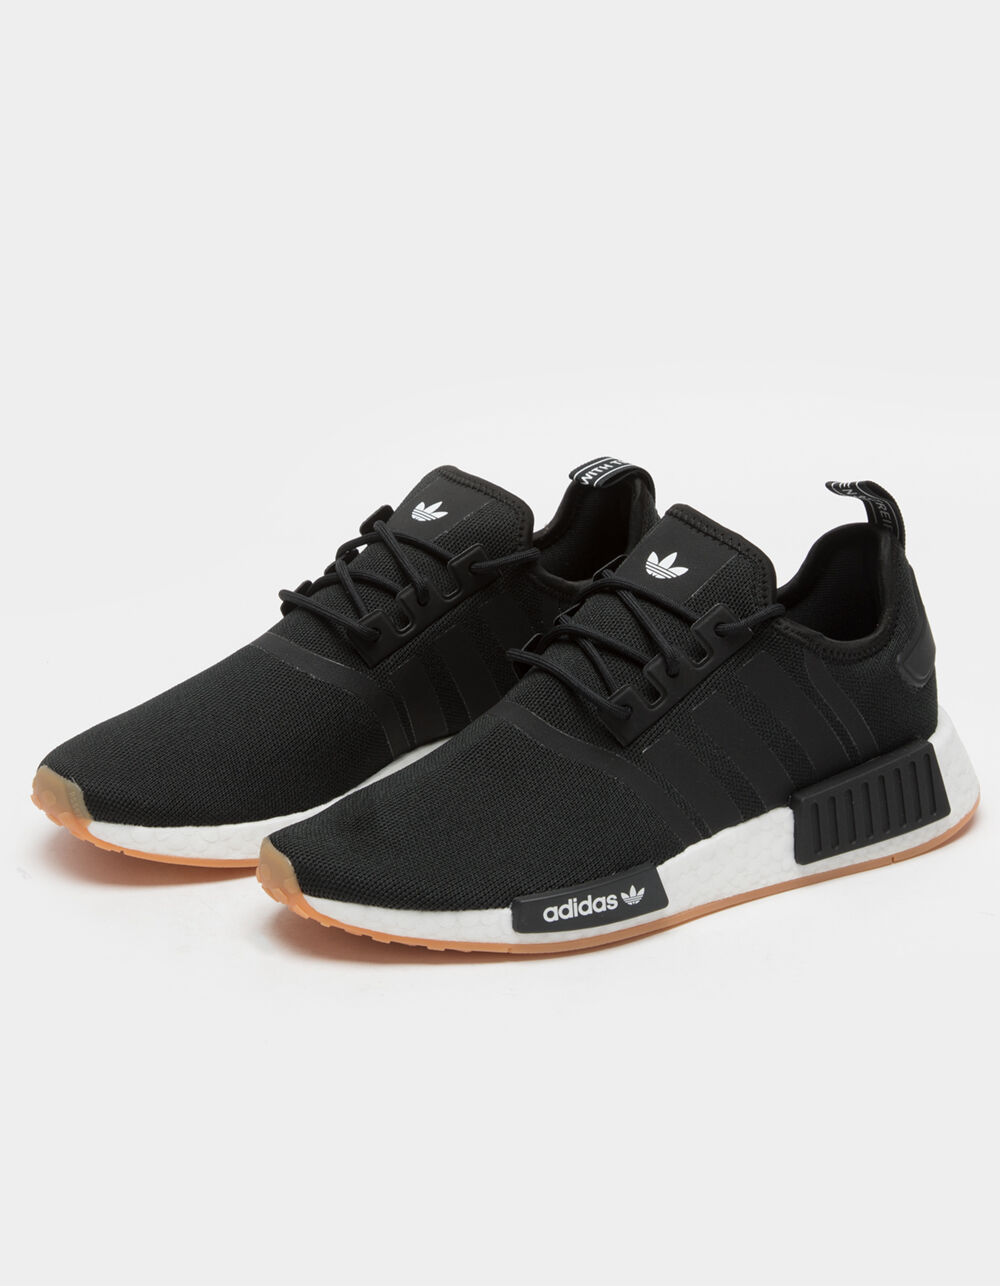 ADIDAS NMD R1 Prime Blue Shoes - BLACK/WHITE | Tillys